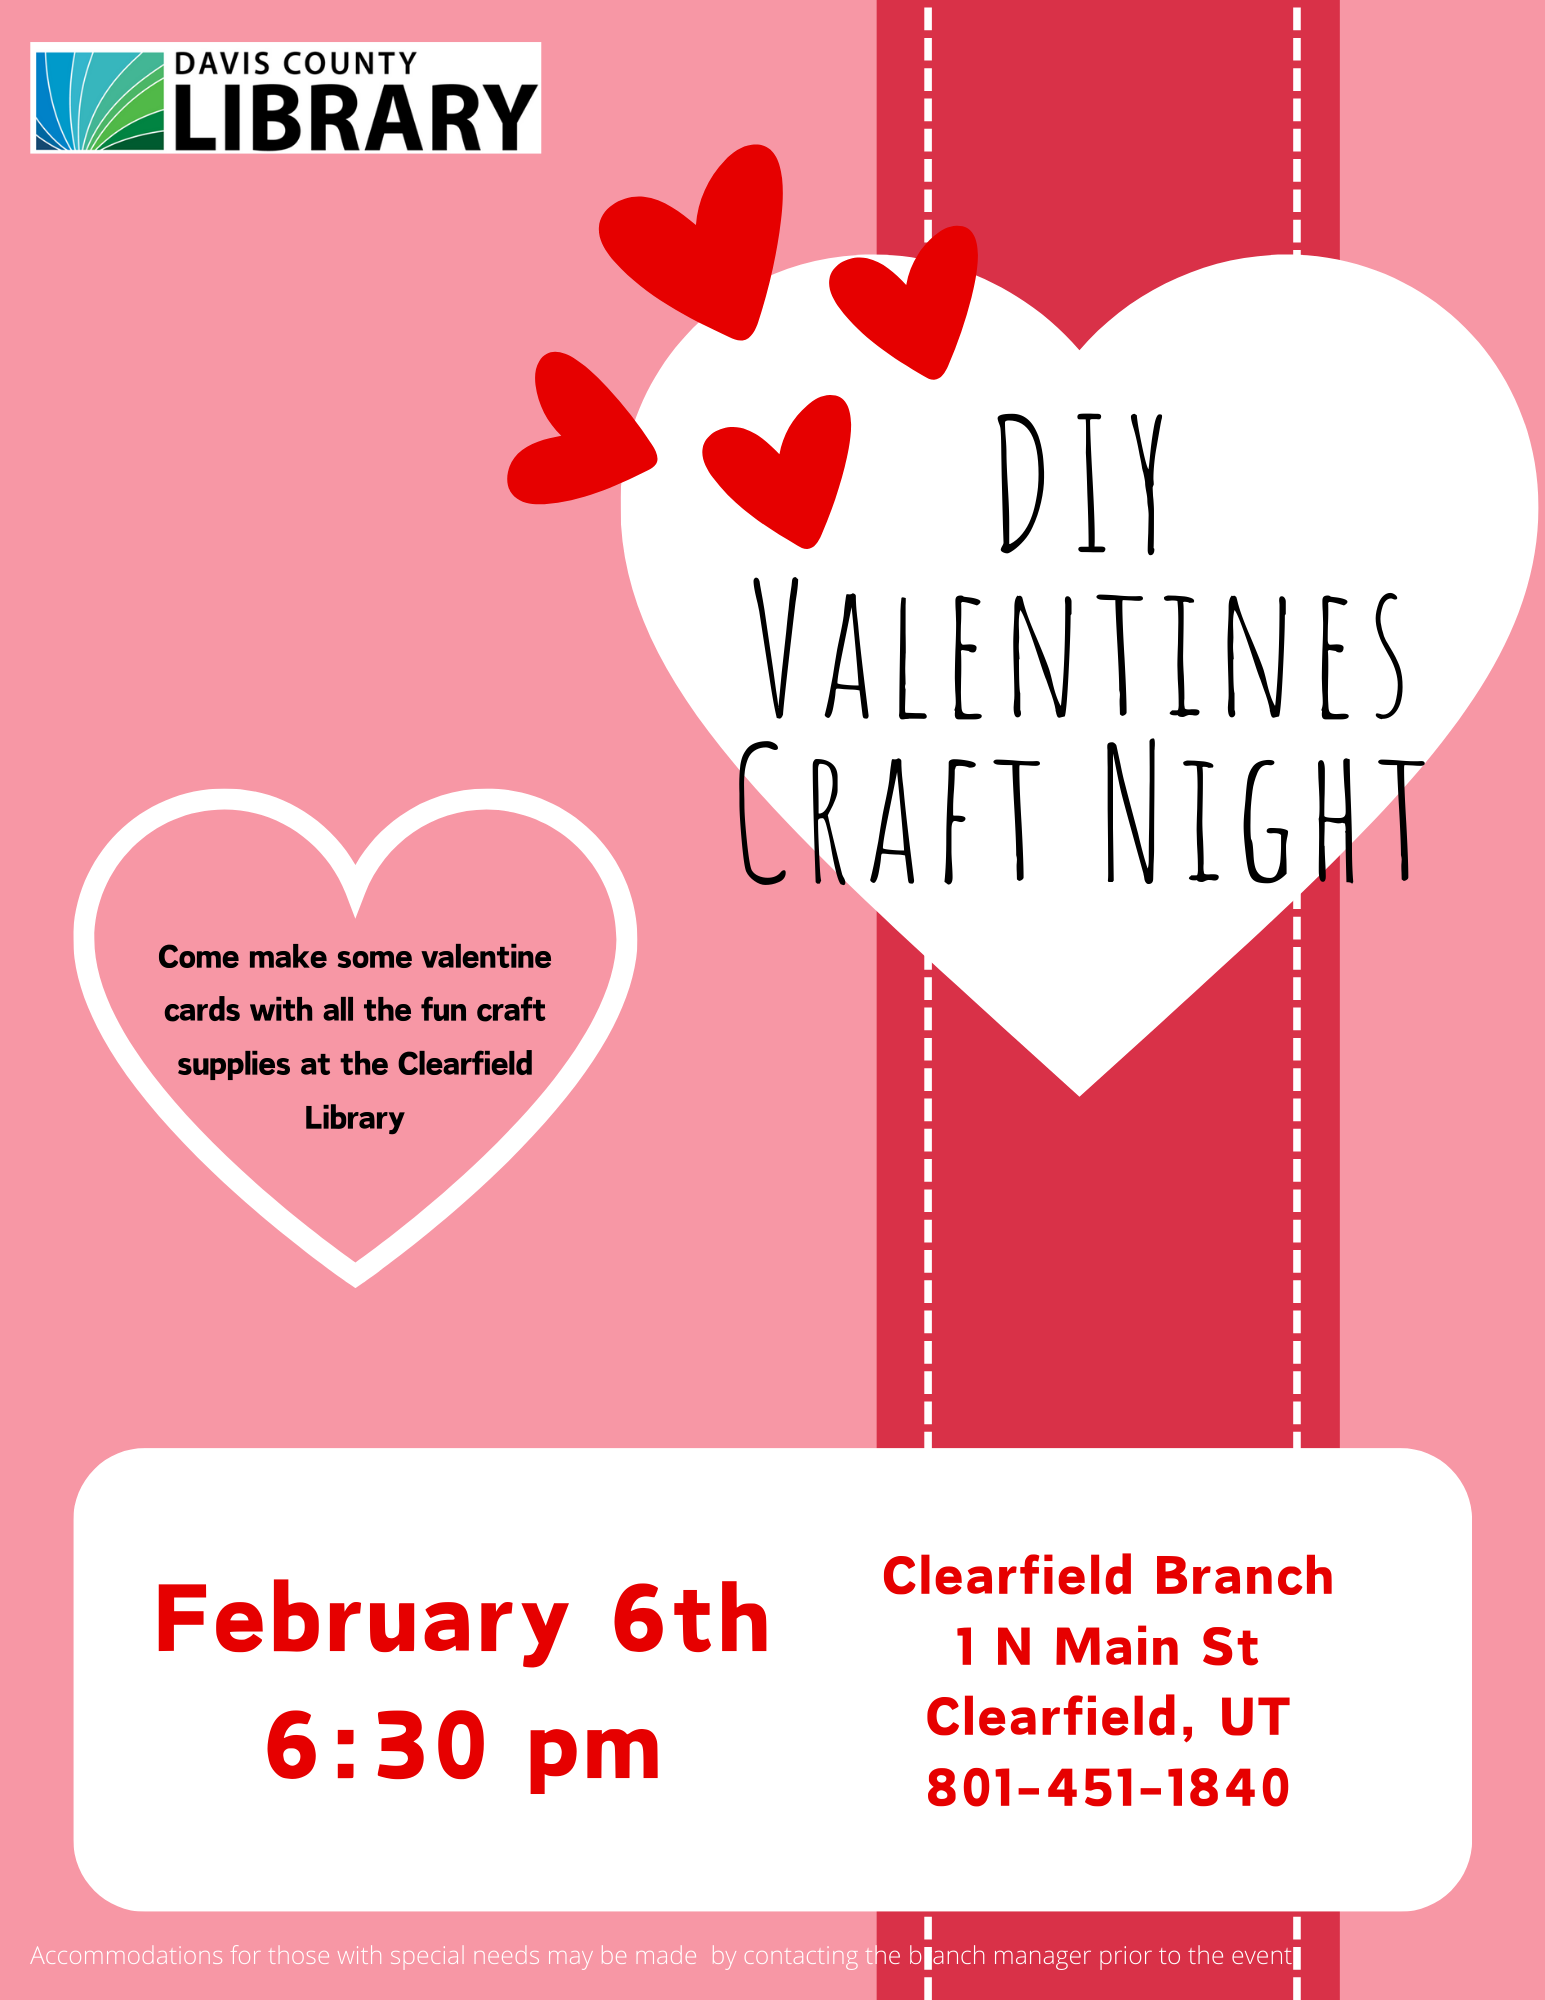 "DIY Valentines Craft Night" on a white heart. "Come make some valentine cards with all the fun craft supplies at the Clearfield Library" inside the outline of a heart. February 6th 6:30 pm. Clearfield Branch 1 N Main St Clearfield, UT 801-451-1840.